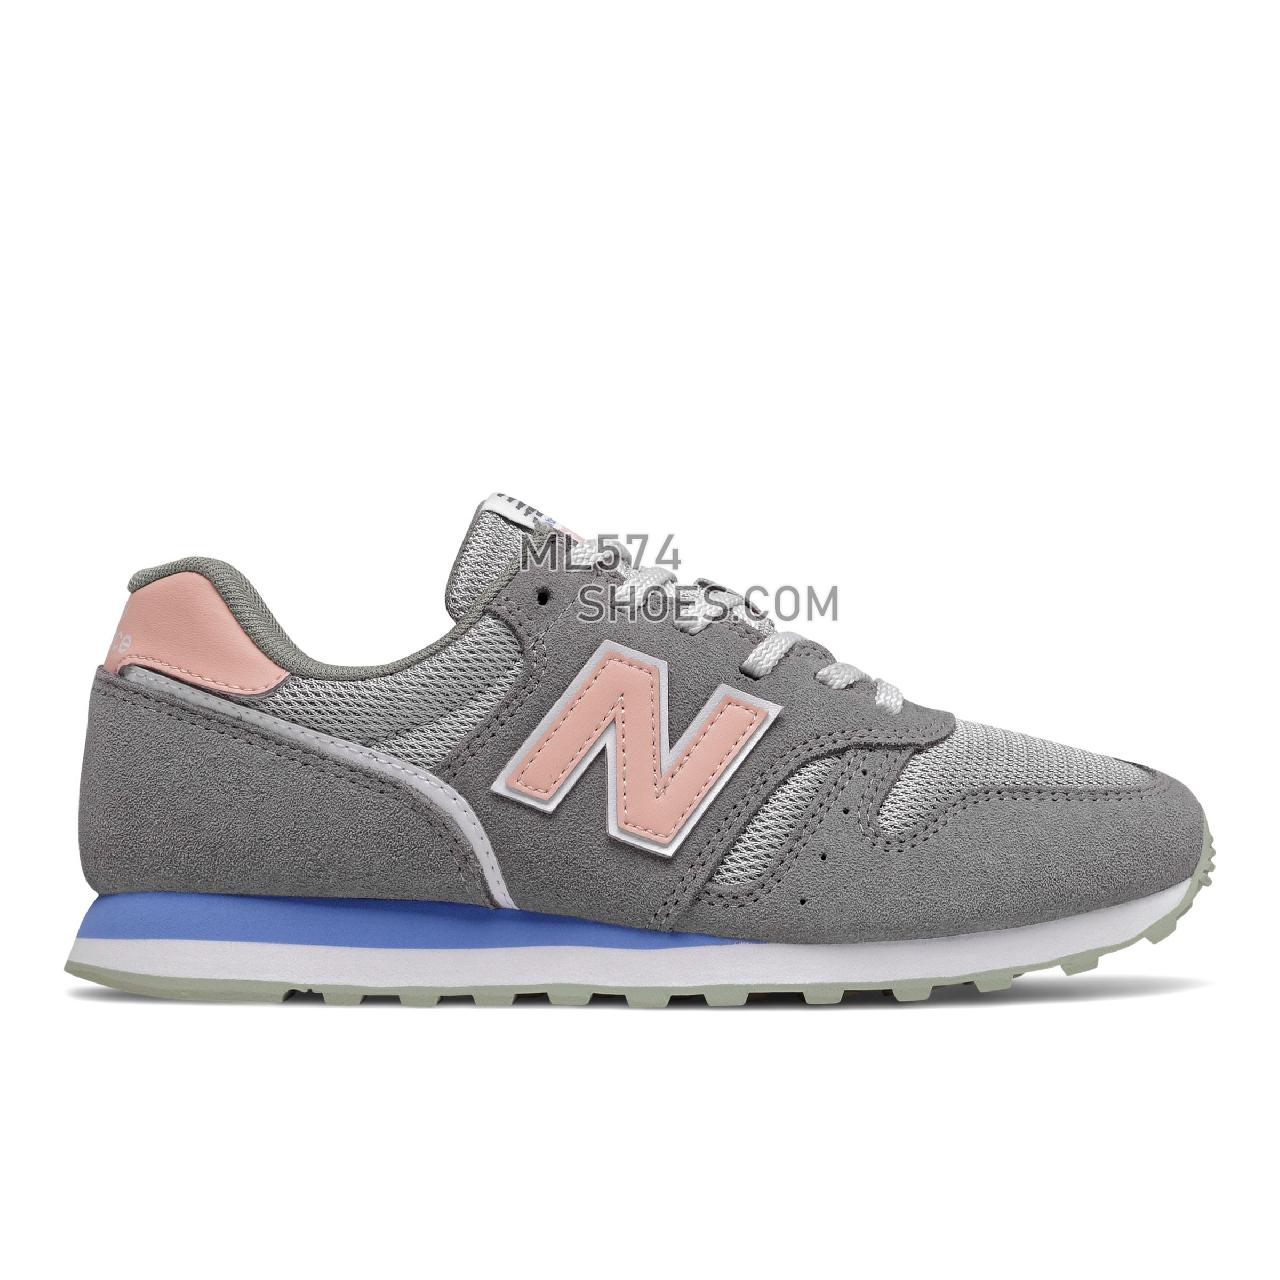 New Balance WL373 - Women's Classic Sneakers - Castlerock with Rose Water - WL373CO2